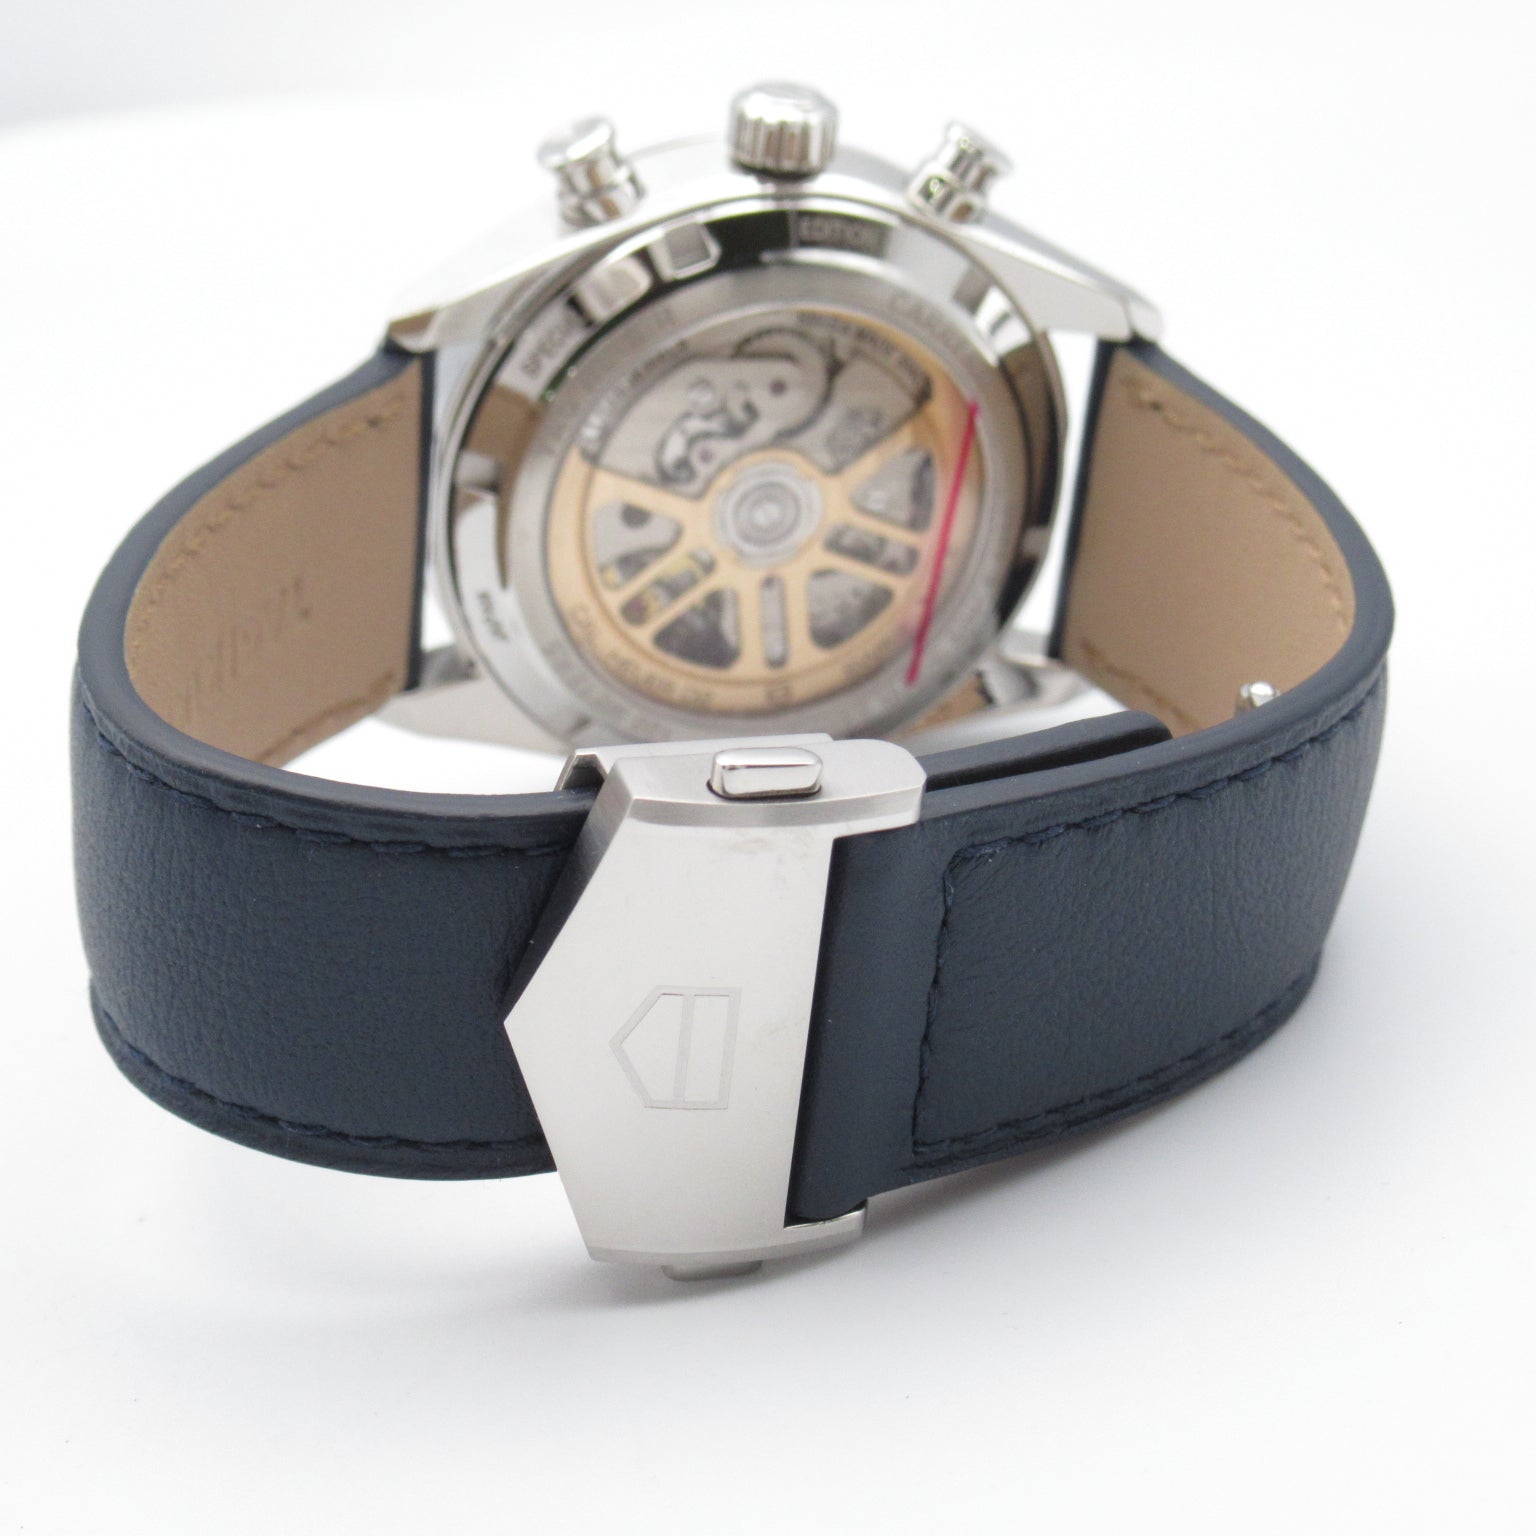 TAG HEUER Carrera Chronograph TOMIYA Limited Edition  Watch Stainless Steel Leather Belt Men Blue / Black CBN201A